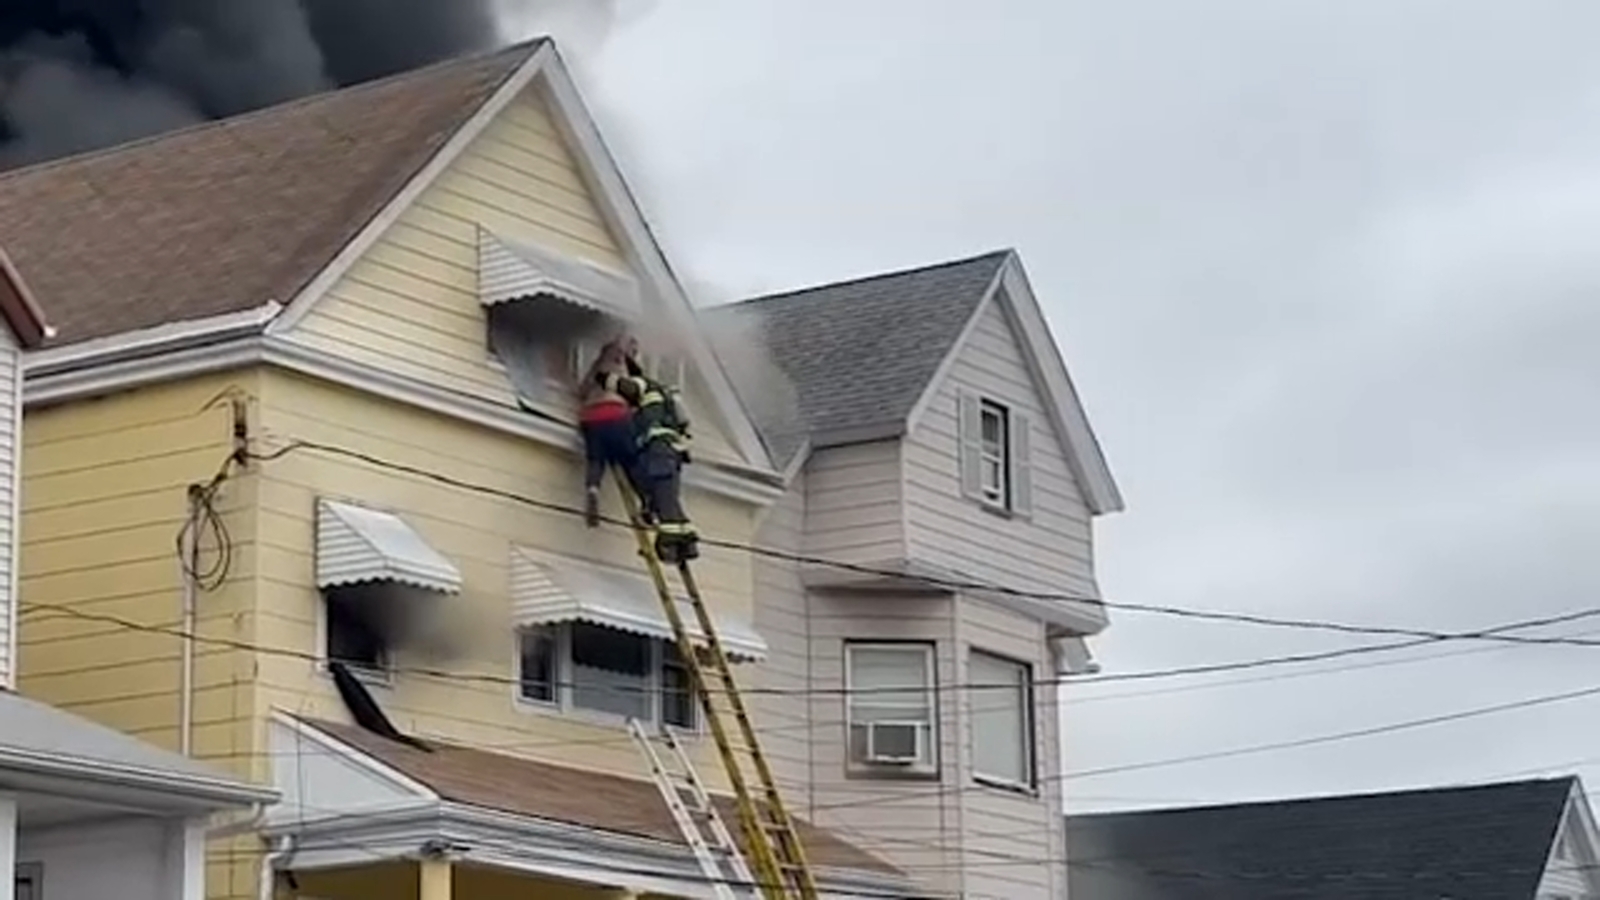 Bayonne house fire: Man rescued, over a dozen displaced after four-alarm blaze tears through NJ home [Video]